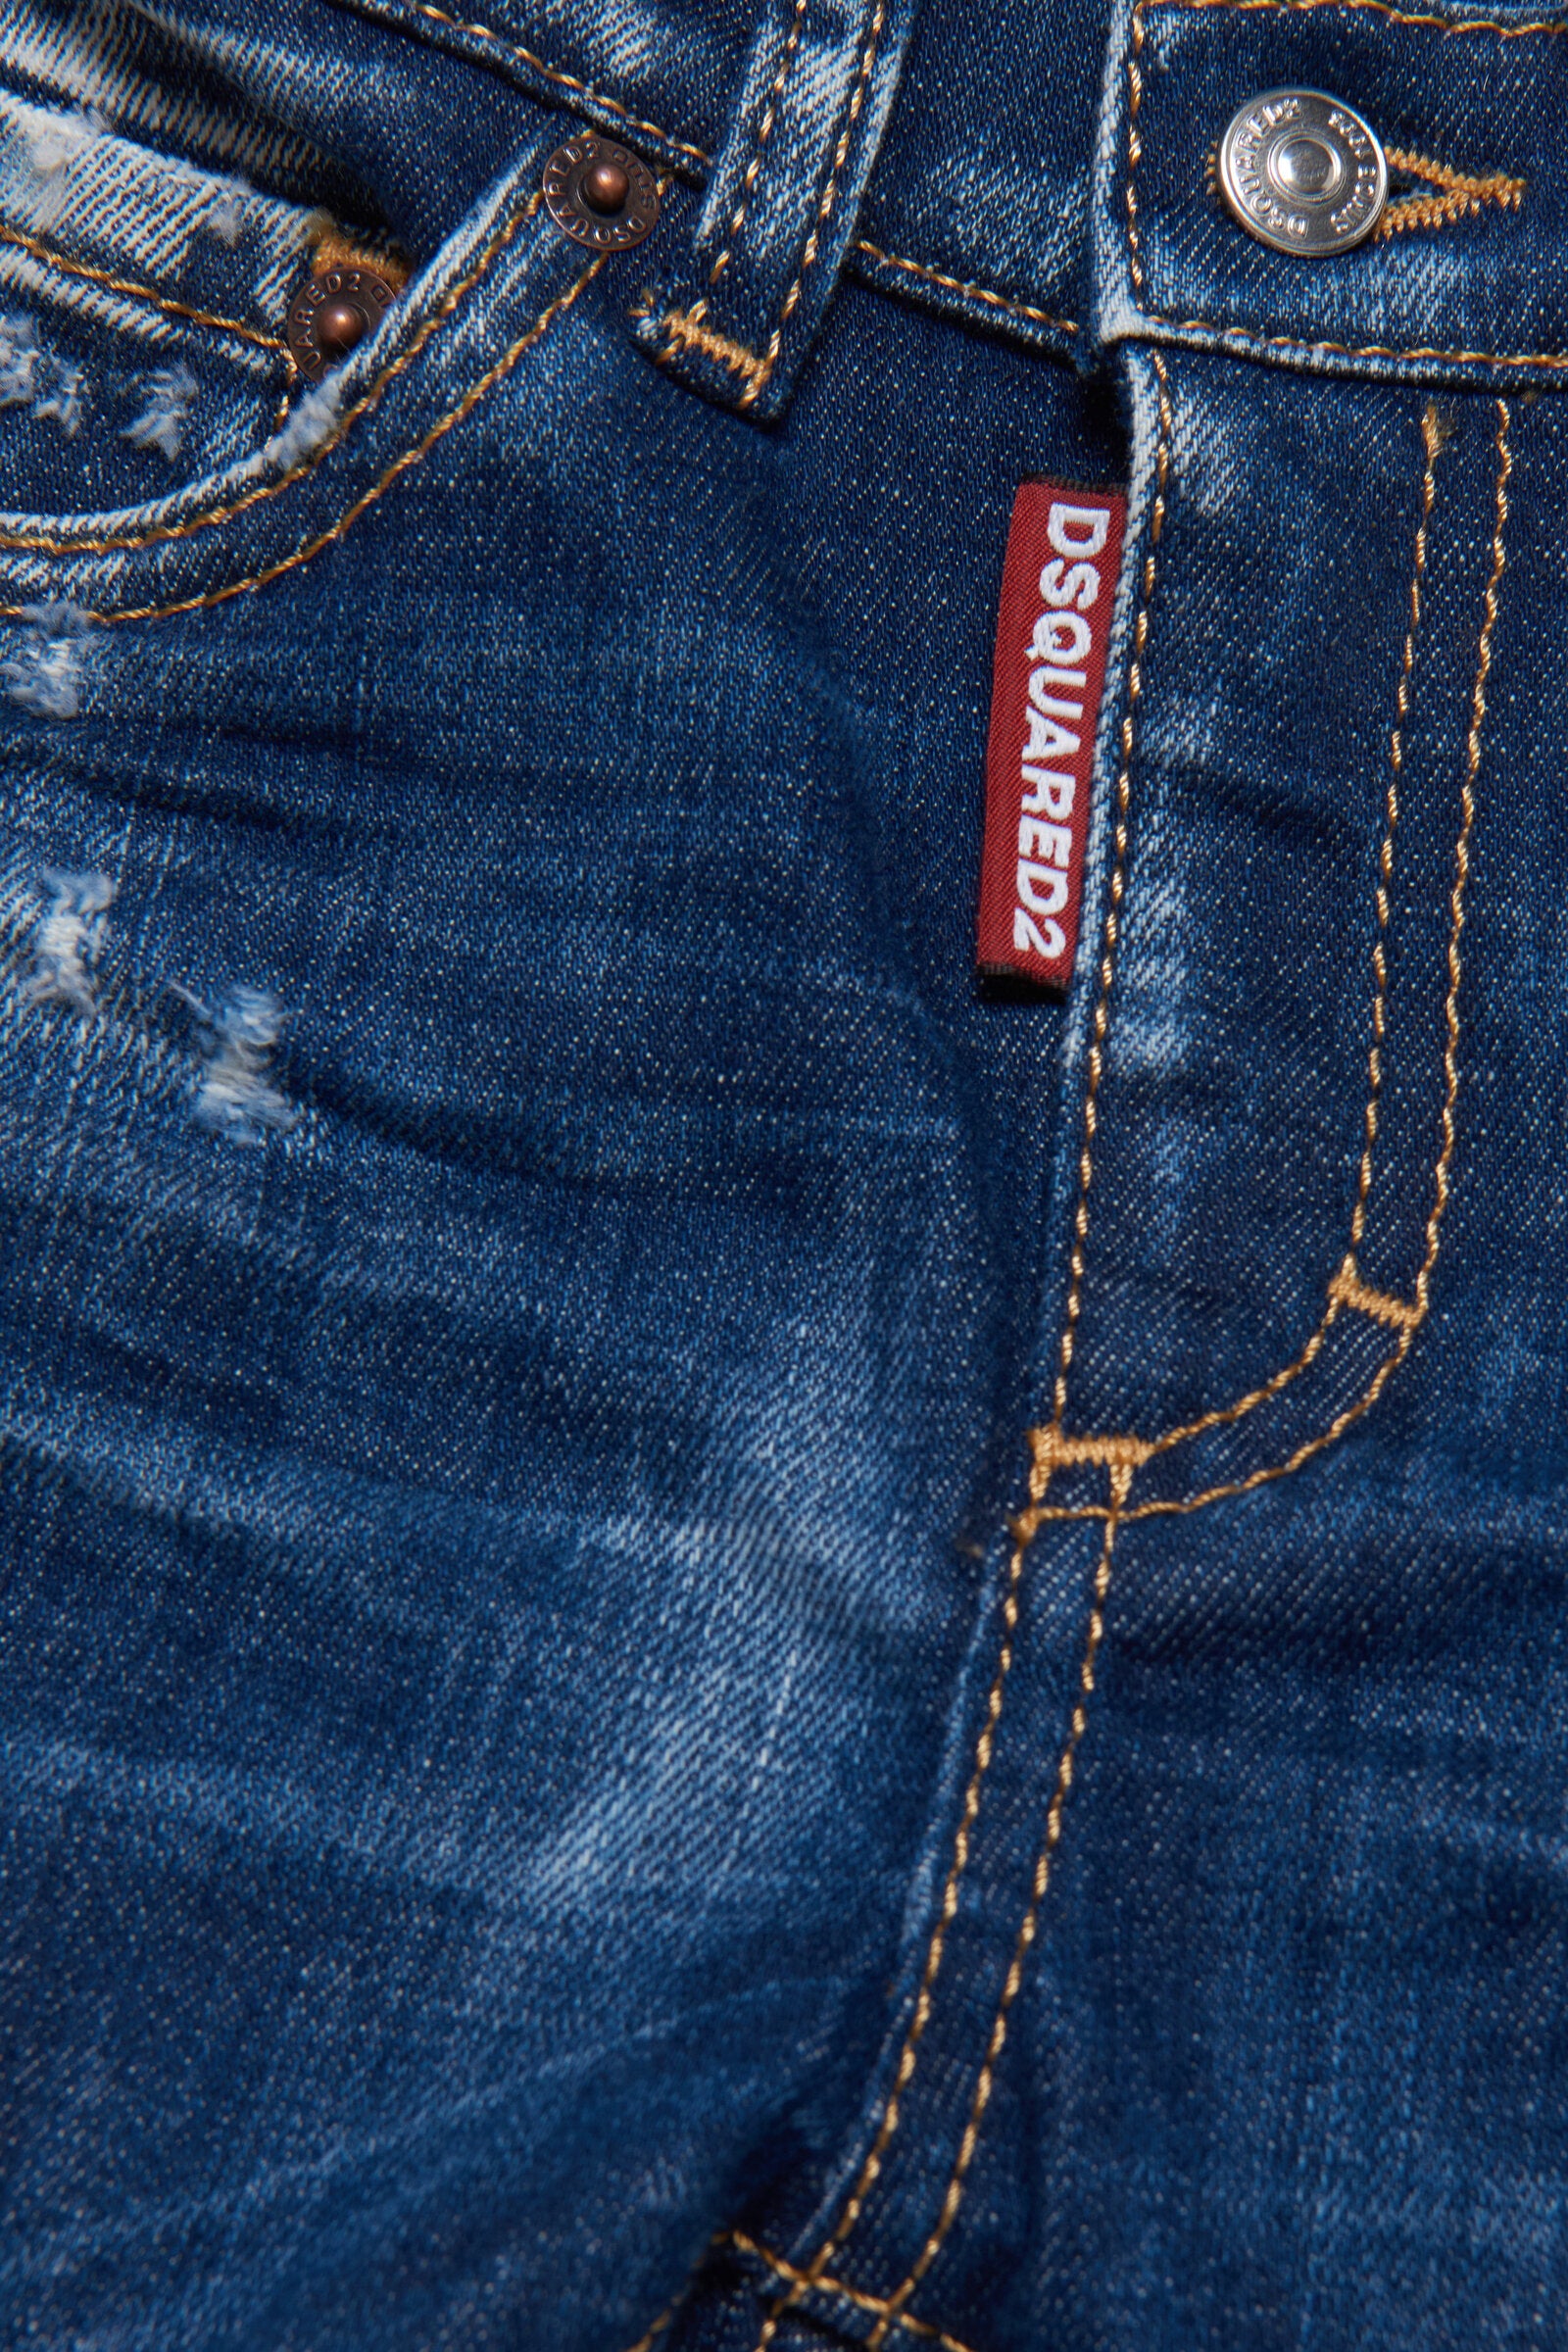 Shaded dark blue jeans with abrasions